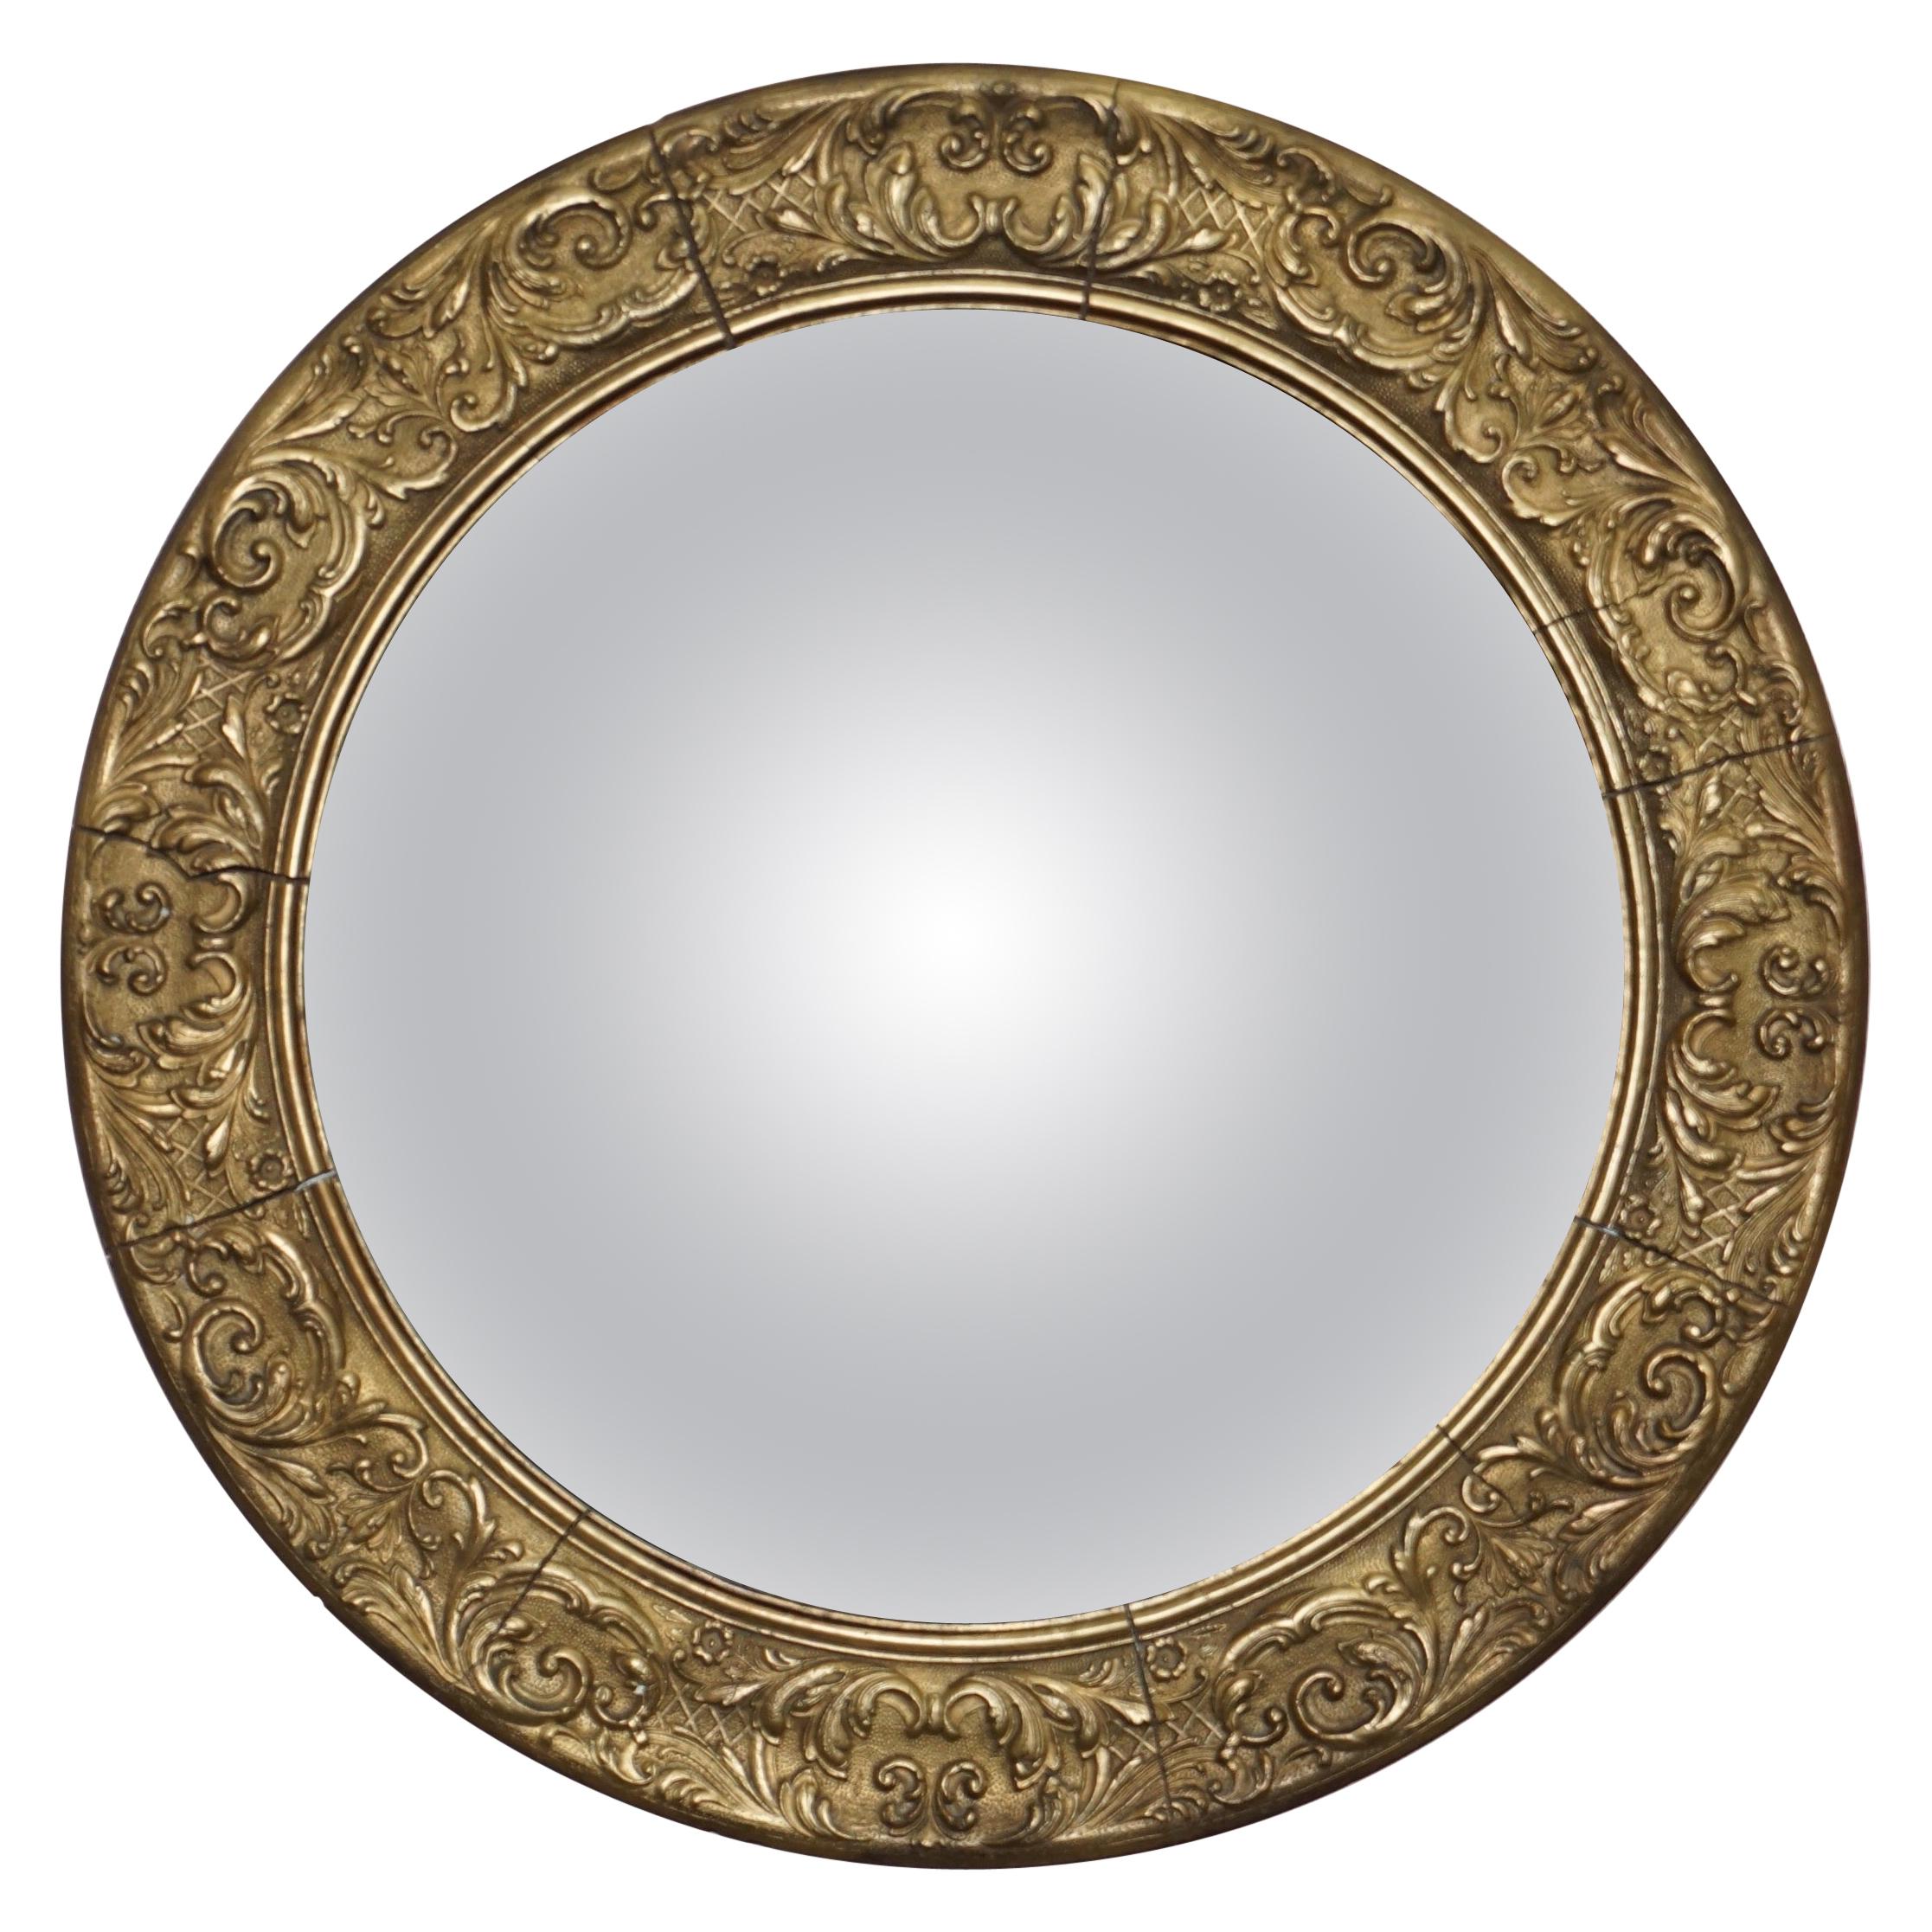 Giltwood Ornate Frame and Plaster Regency Ships Style Convex Mirror Domed Glass